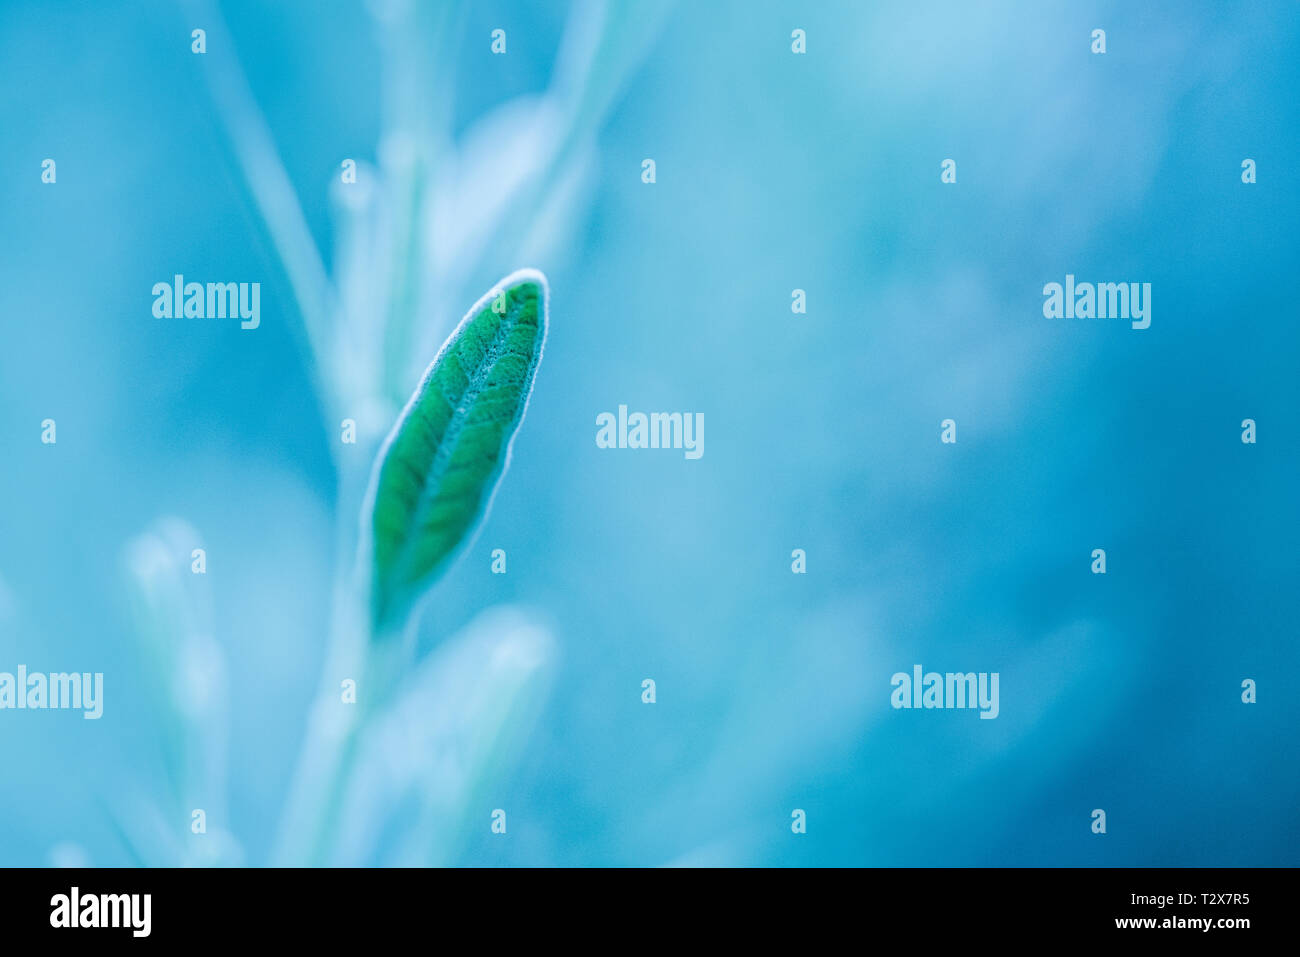 An isolated lavender leaf on the right against a blurred blue background Stock Photo